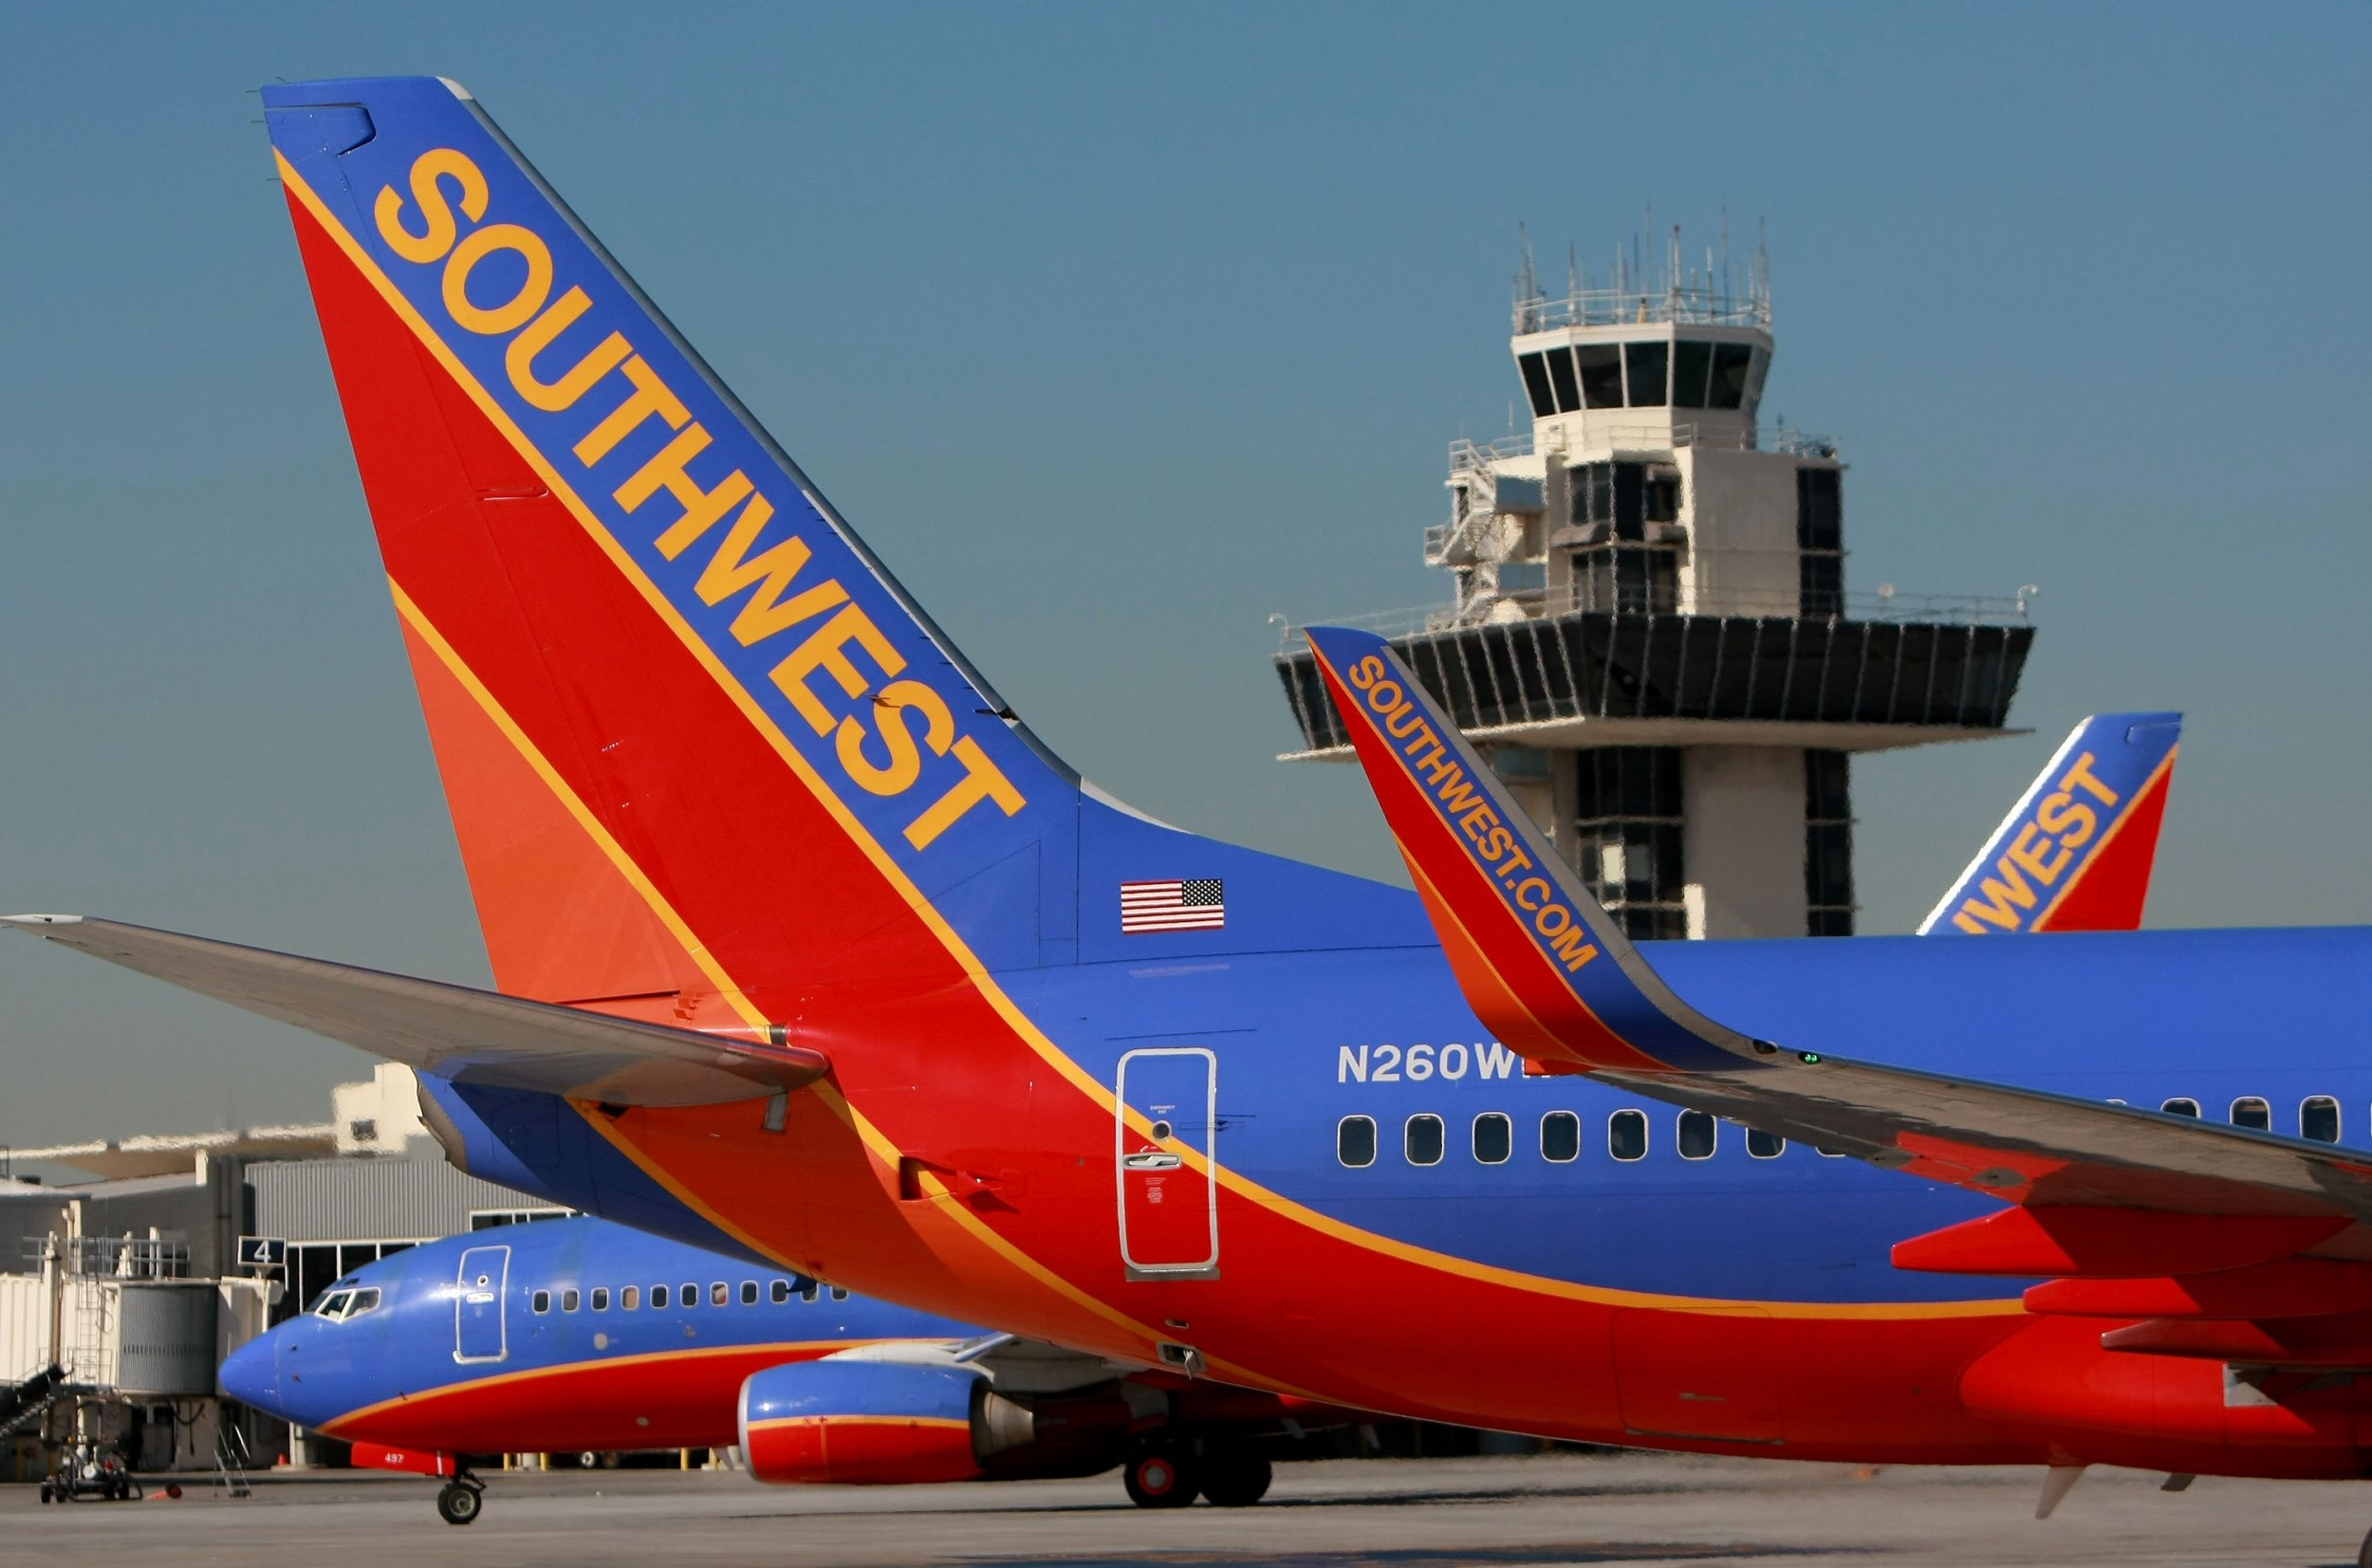 Southwest Airlines Makes Emergency Landing After Cabin Loses Pressure in Th...